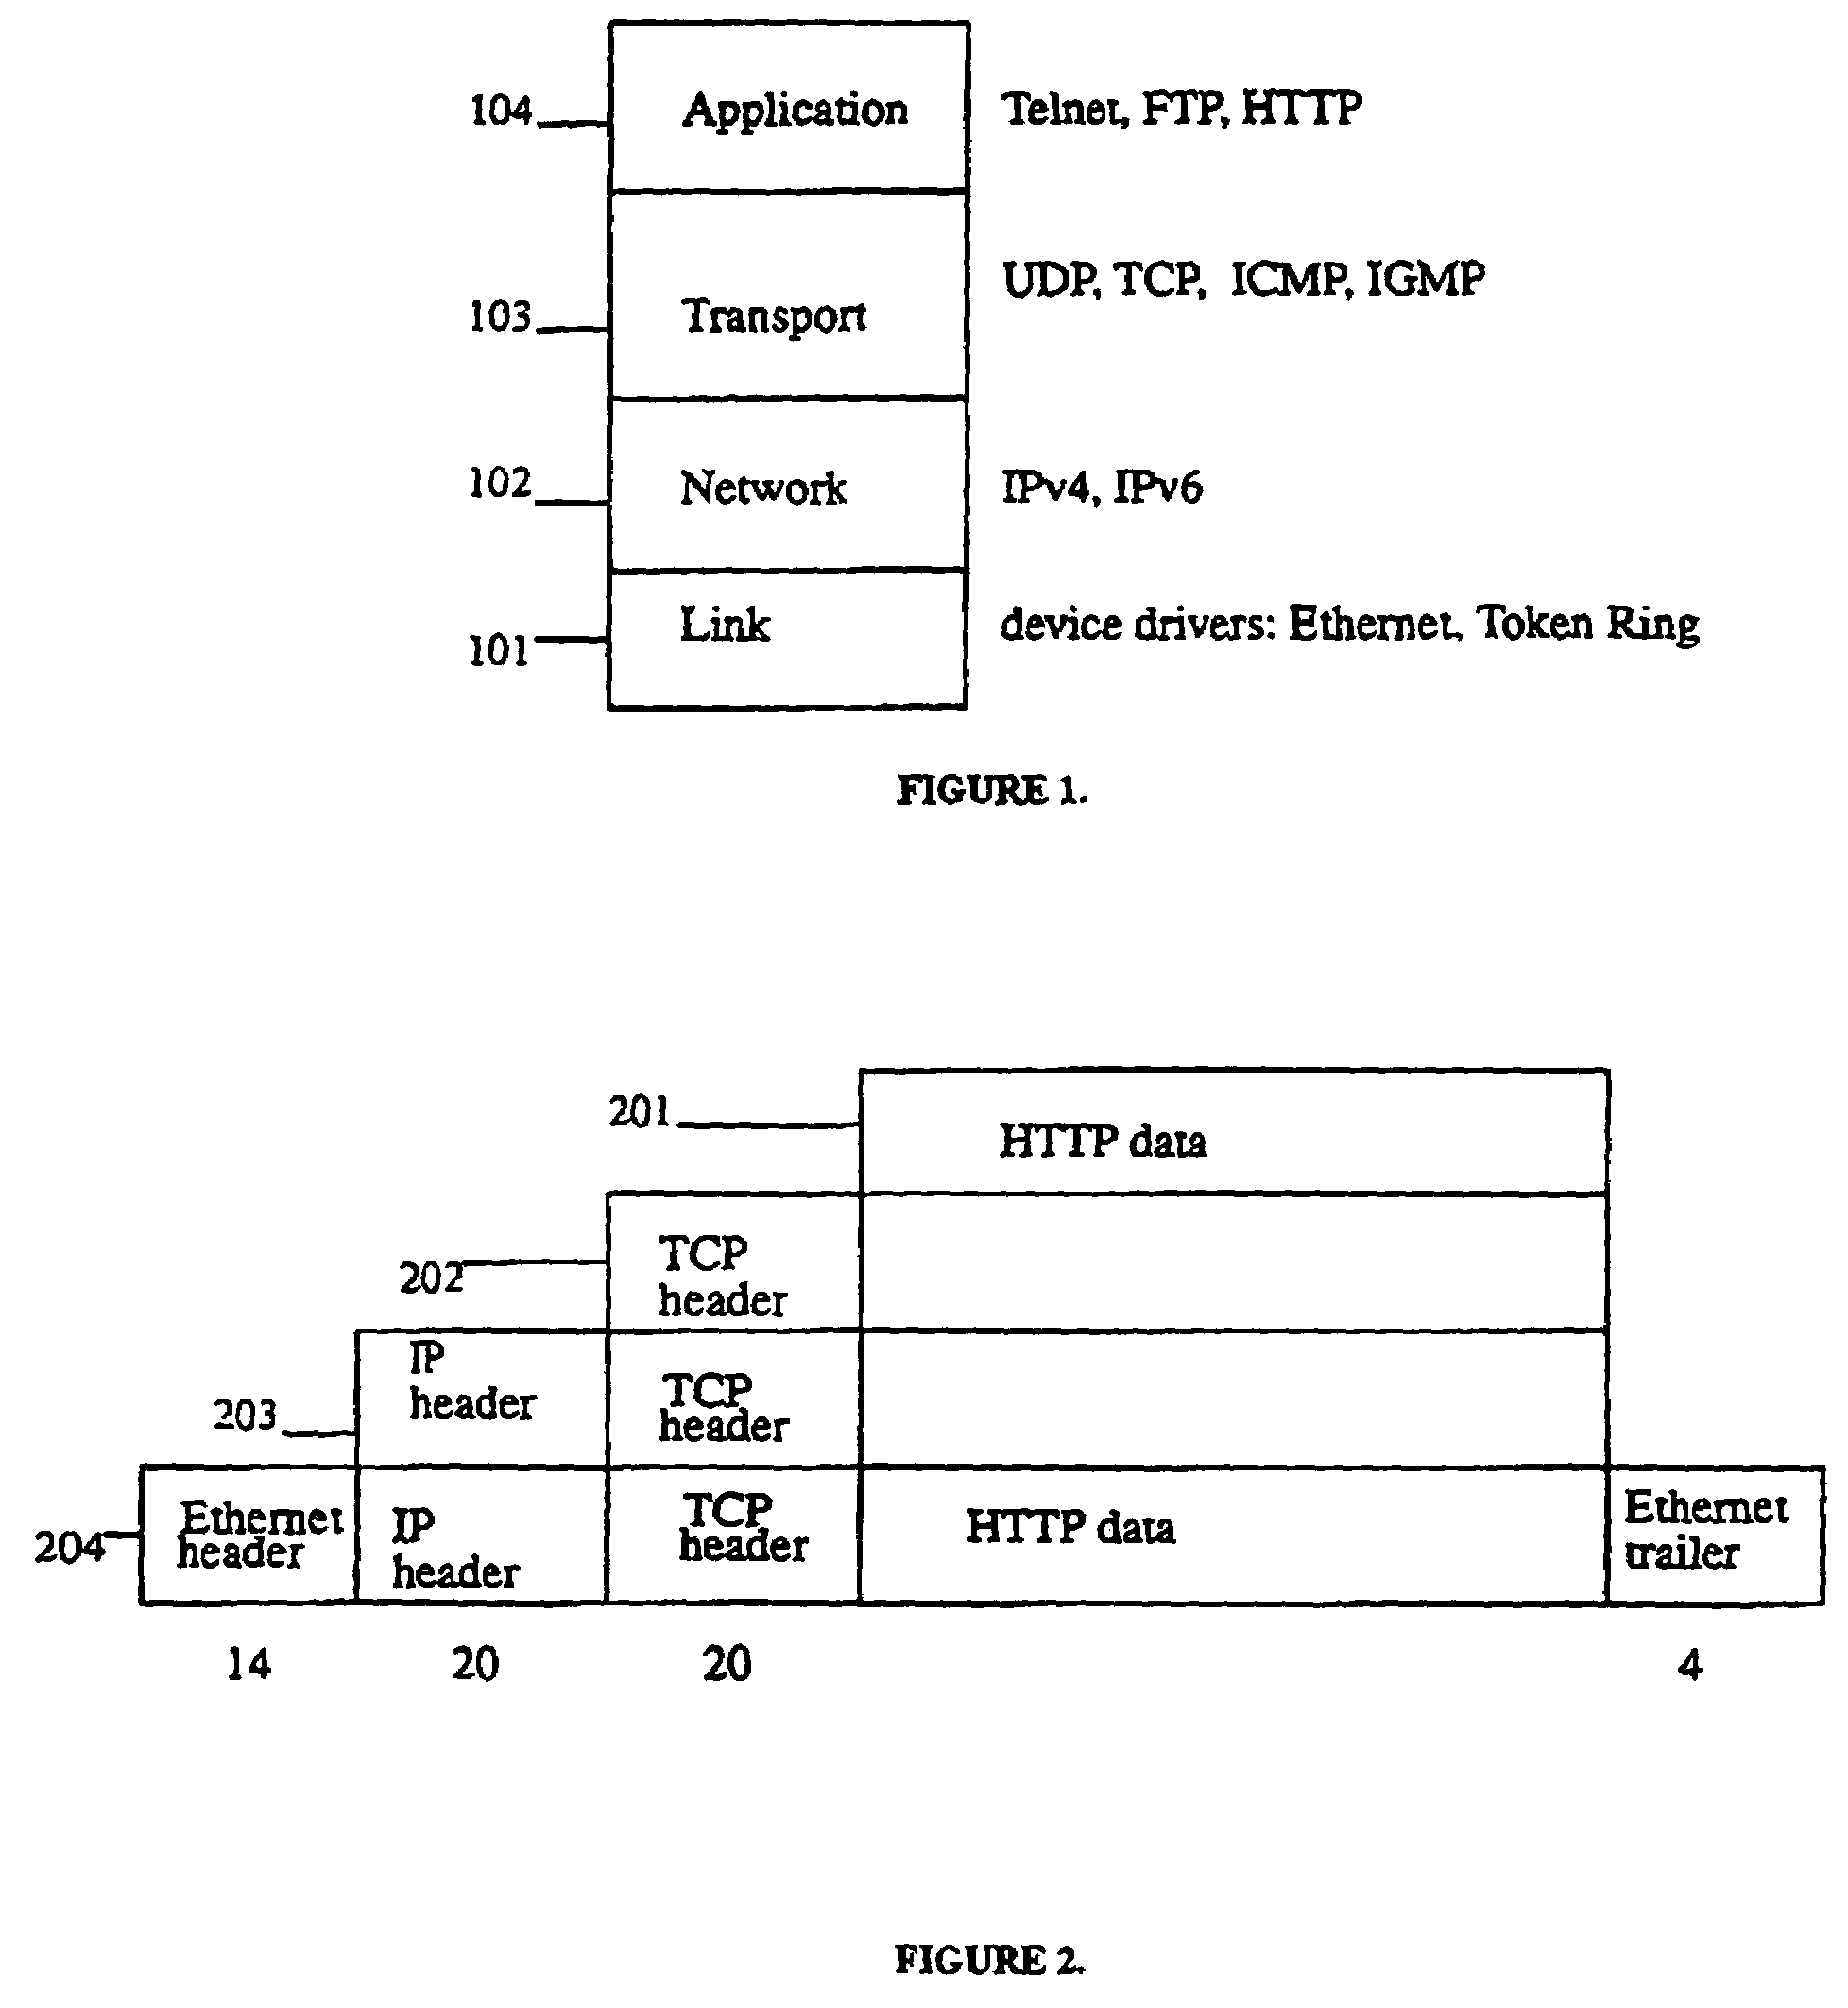 Network data packet classification and demultiplexing